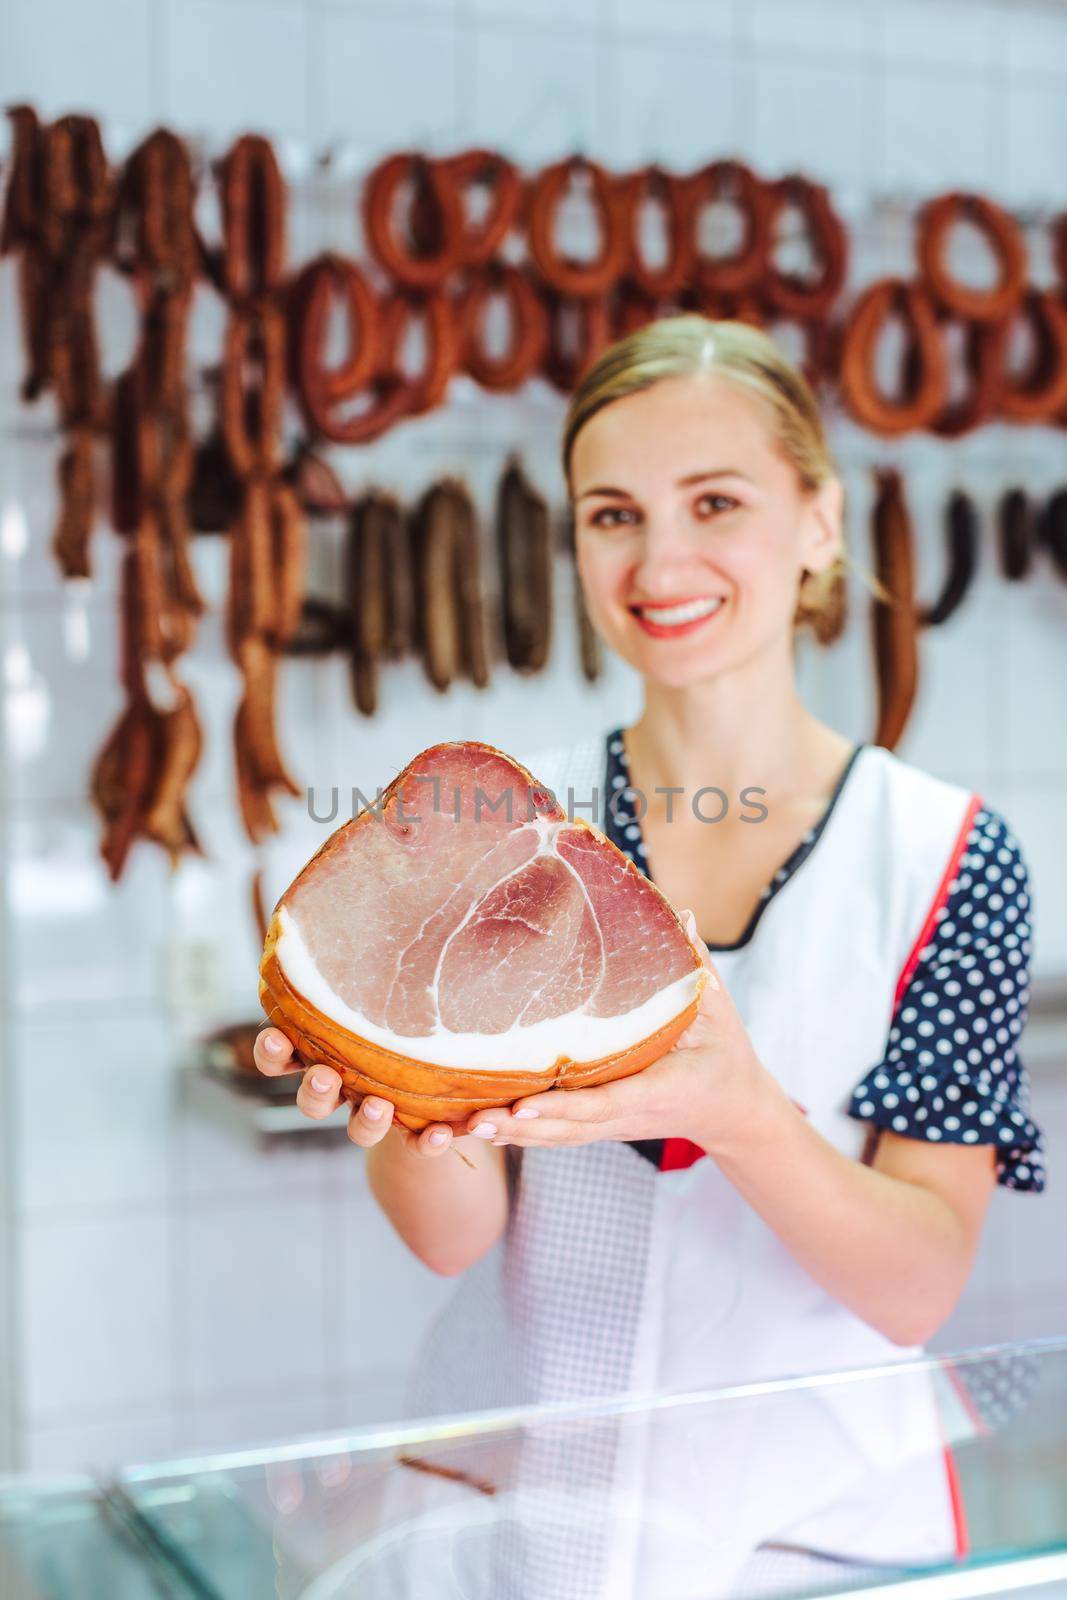 Shop assistant with ham in her butchery by Kzenon